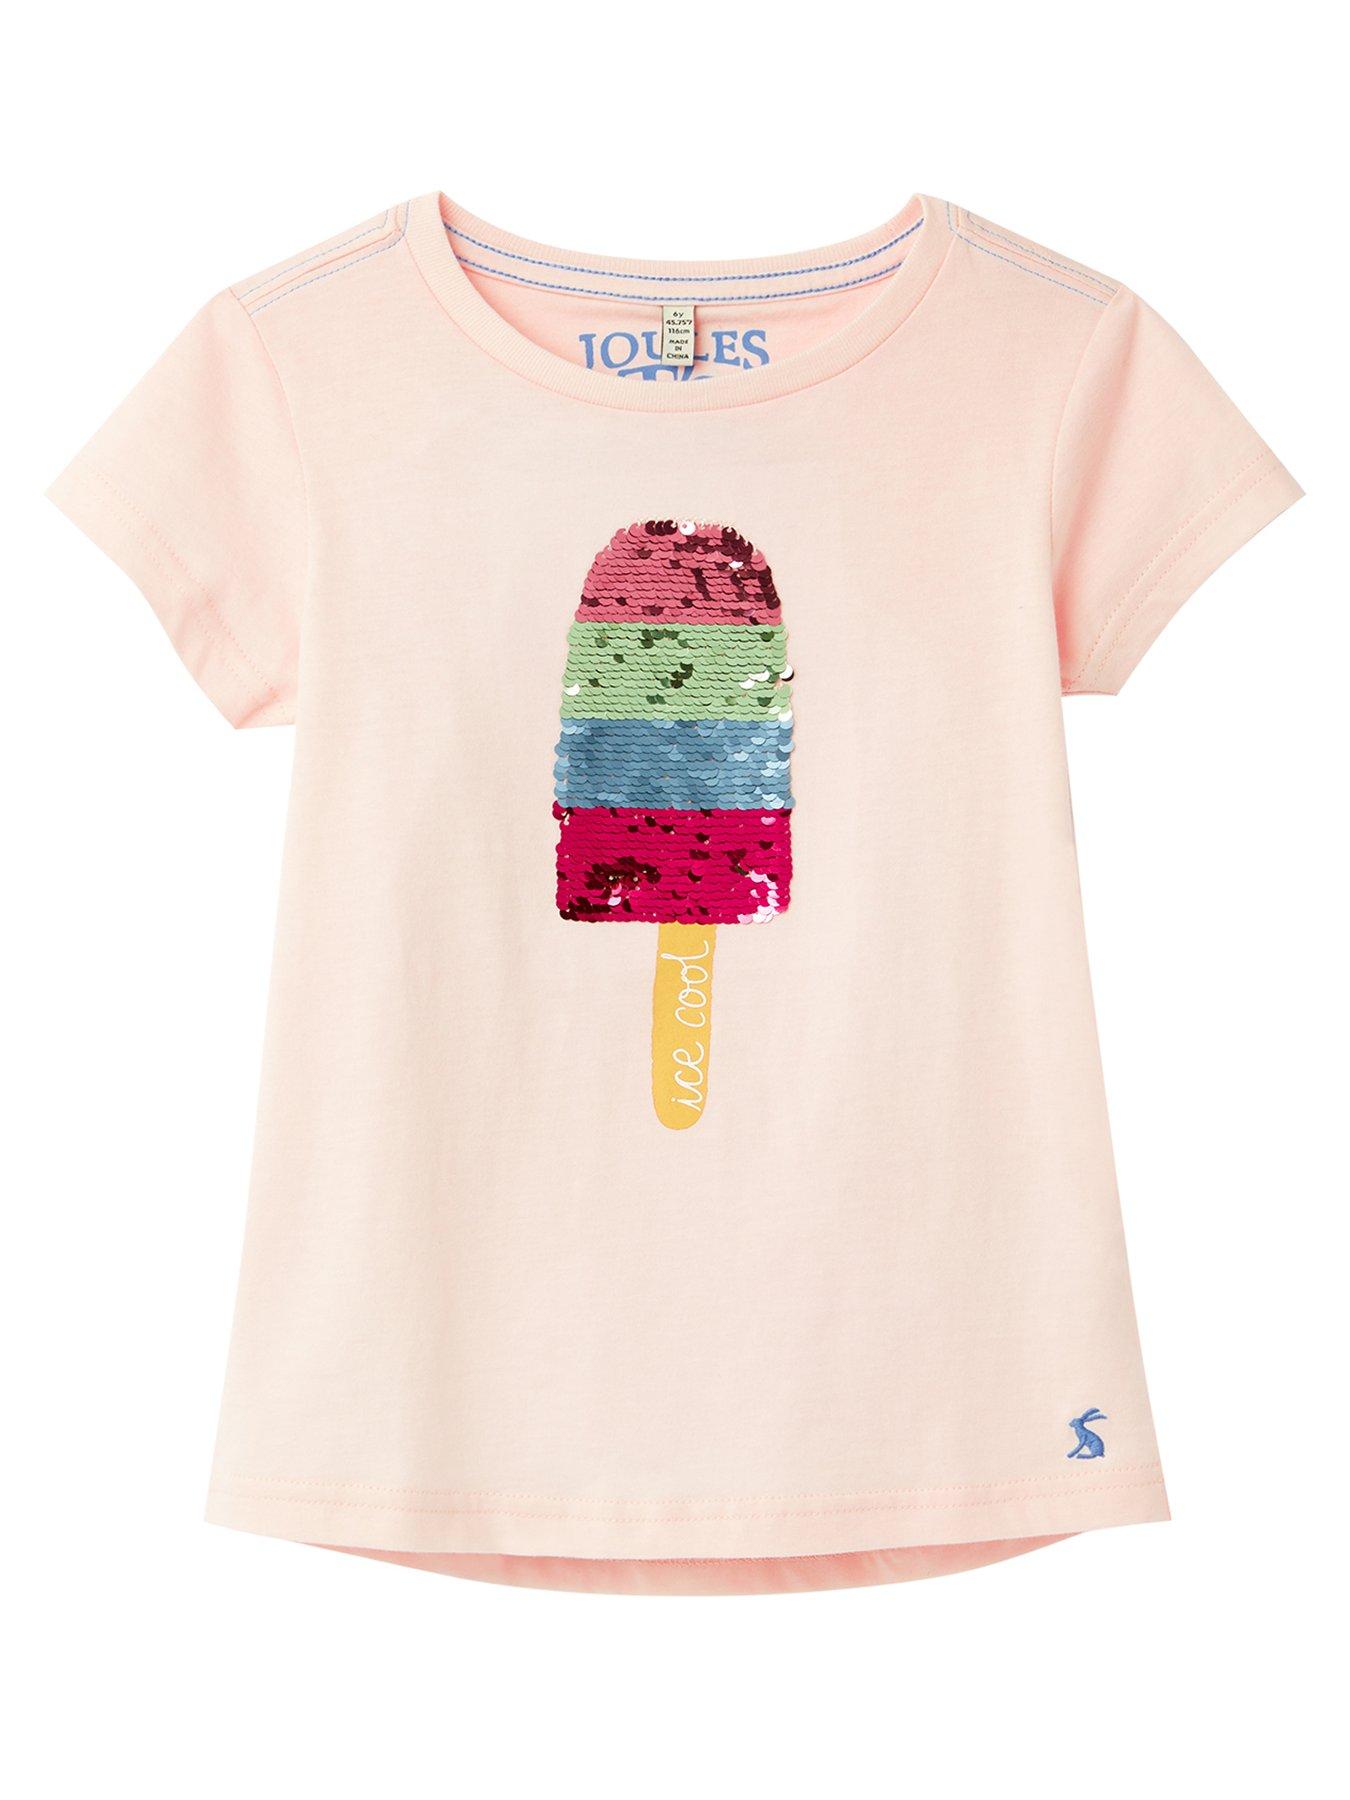 Joules Girls Astra Ice Lolly T-shirt - Pink | very.co.uk